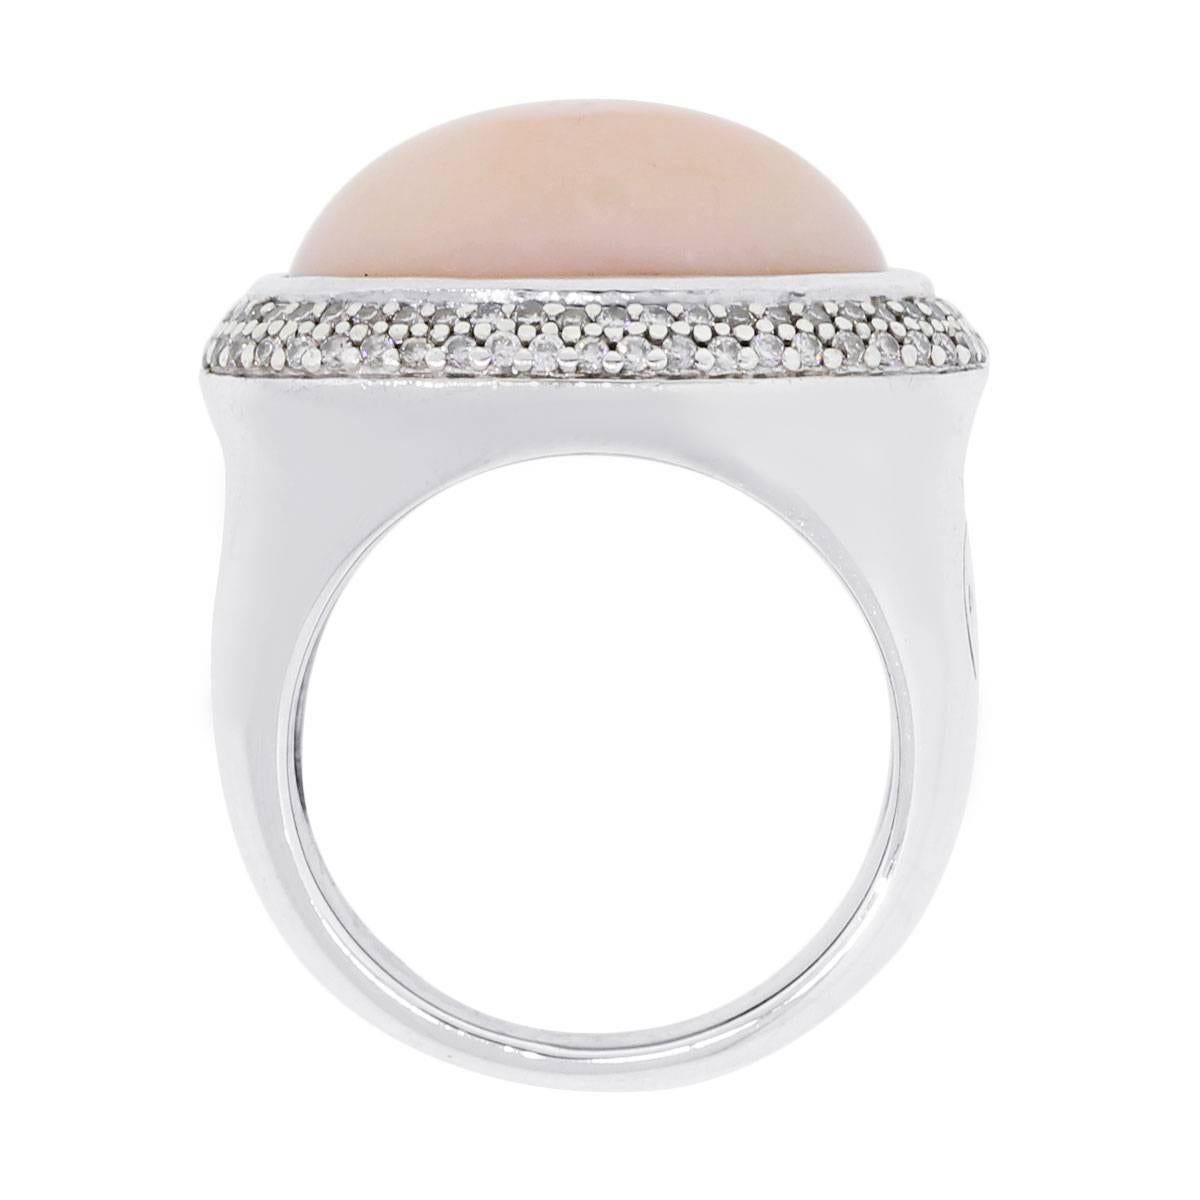 Designer: David Yurman
Material: Sterling silver
Diamond Details: Round brilliant diamonds
Gemstone Details: Oval shape Peach Moonstone measuring approximately 17.27mm x 12.261mm
Ring Size: 6.75
Ring Measurements: 1.12